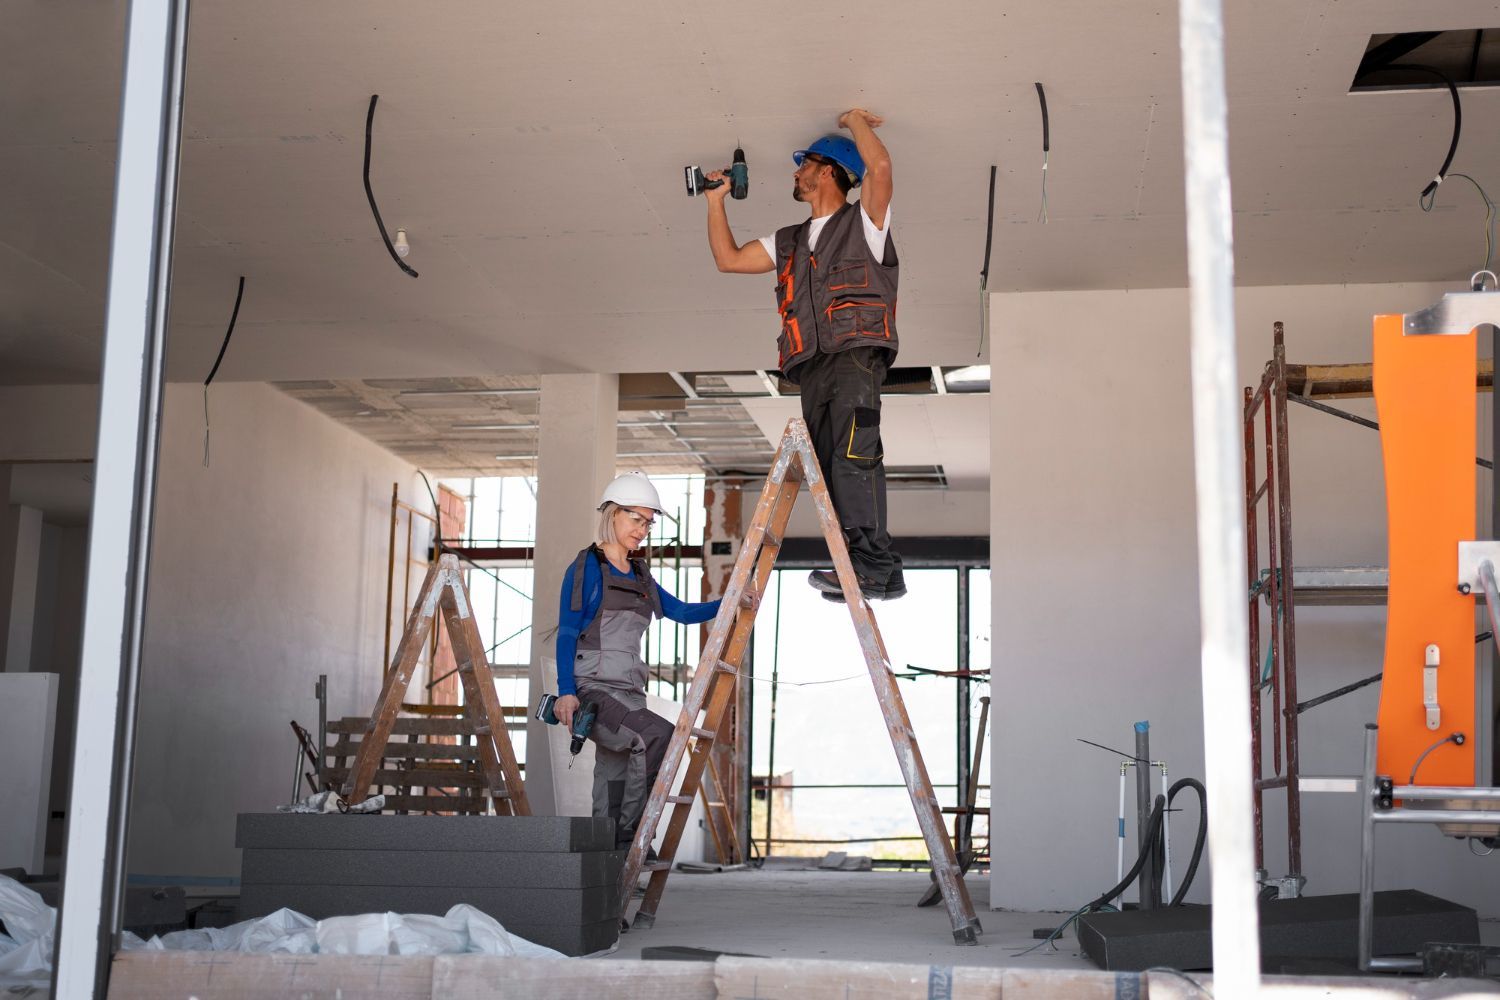 Two construction workers are working on the ceiling of a building.